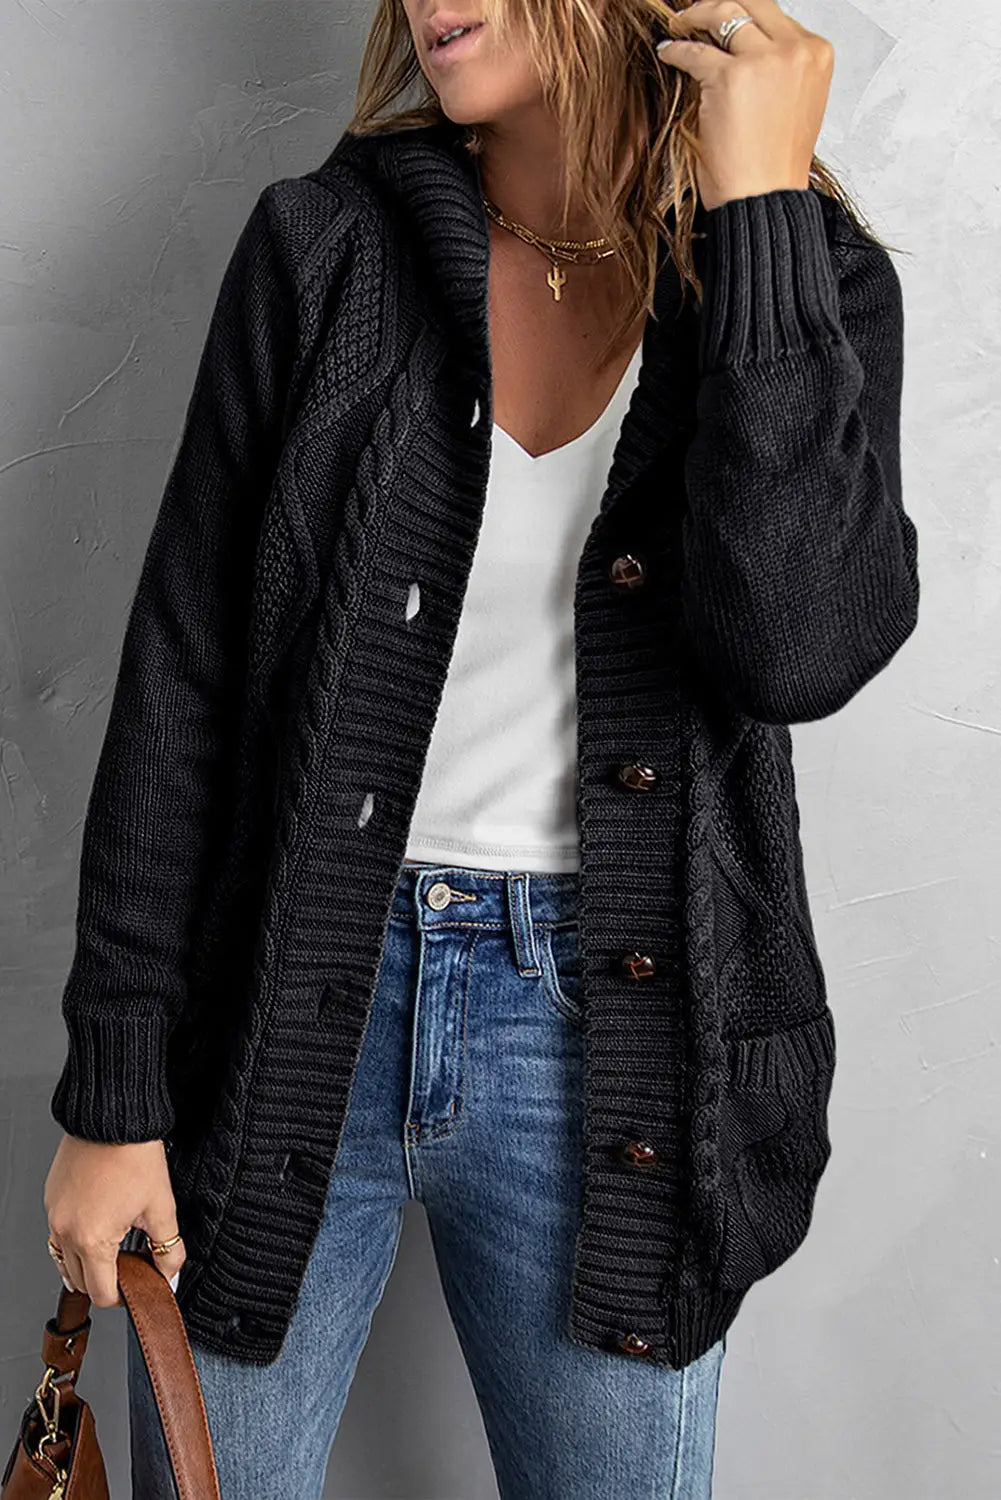 Black twist pattern knit button front hooded cardigan - s / 100% acrylic - sweaters & cardigans